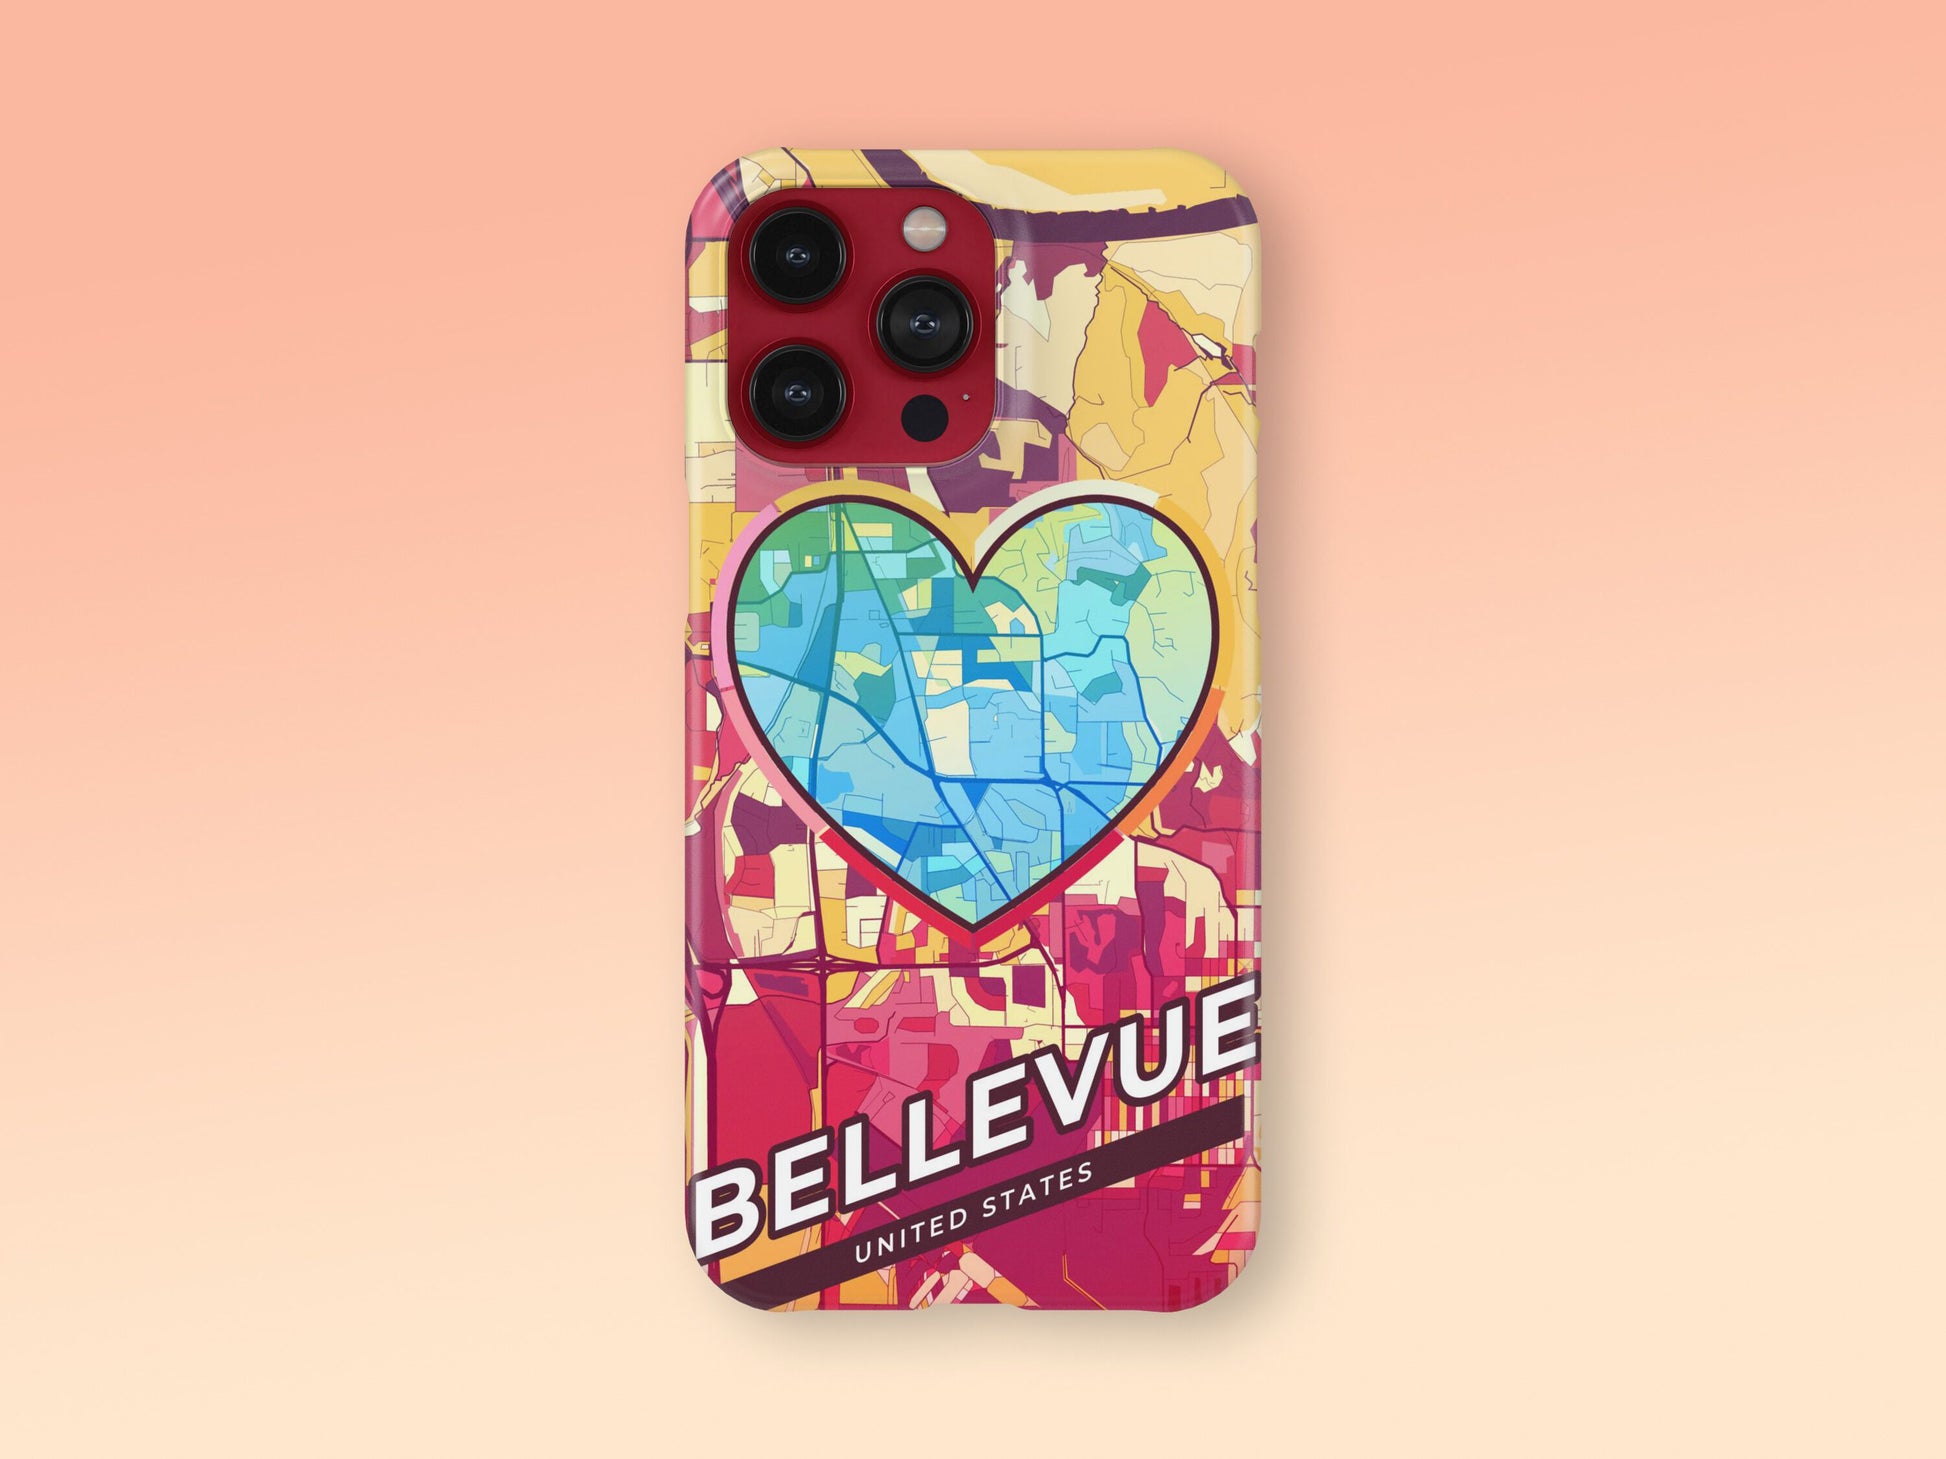 Bellevue Nebraska slim phone case with colorful icon. Birthday, wedding or housewarming gift. Couple match cases. 2